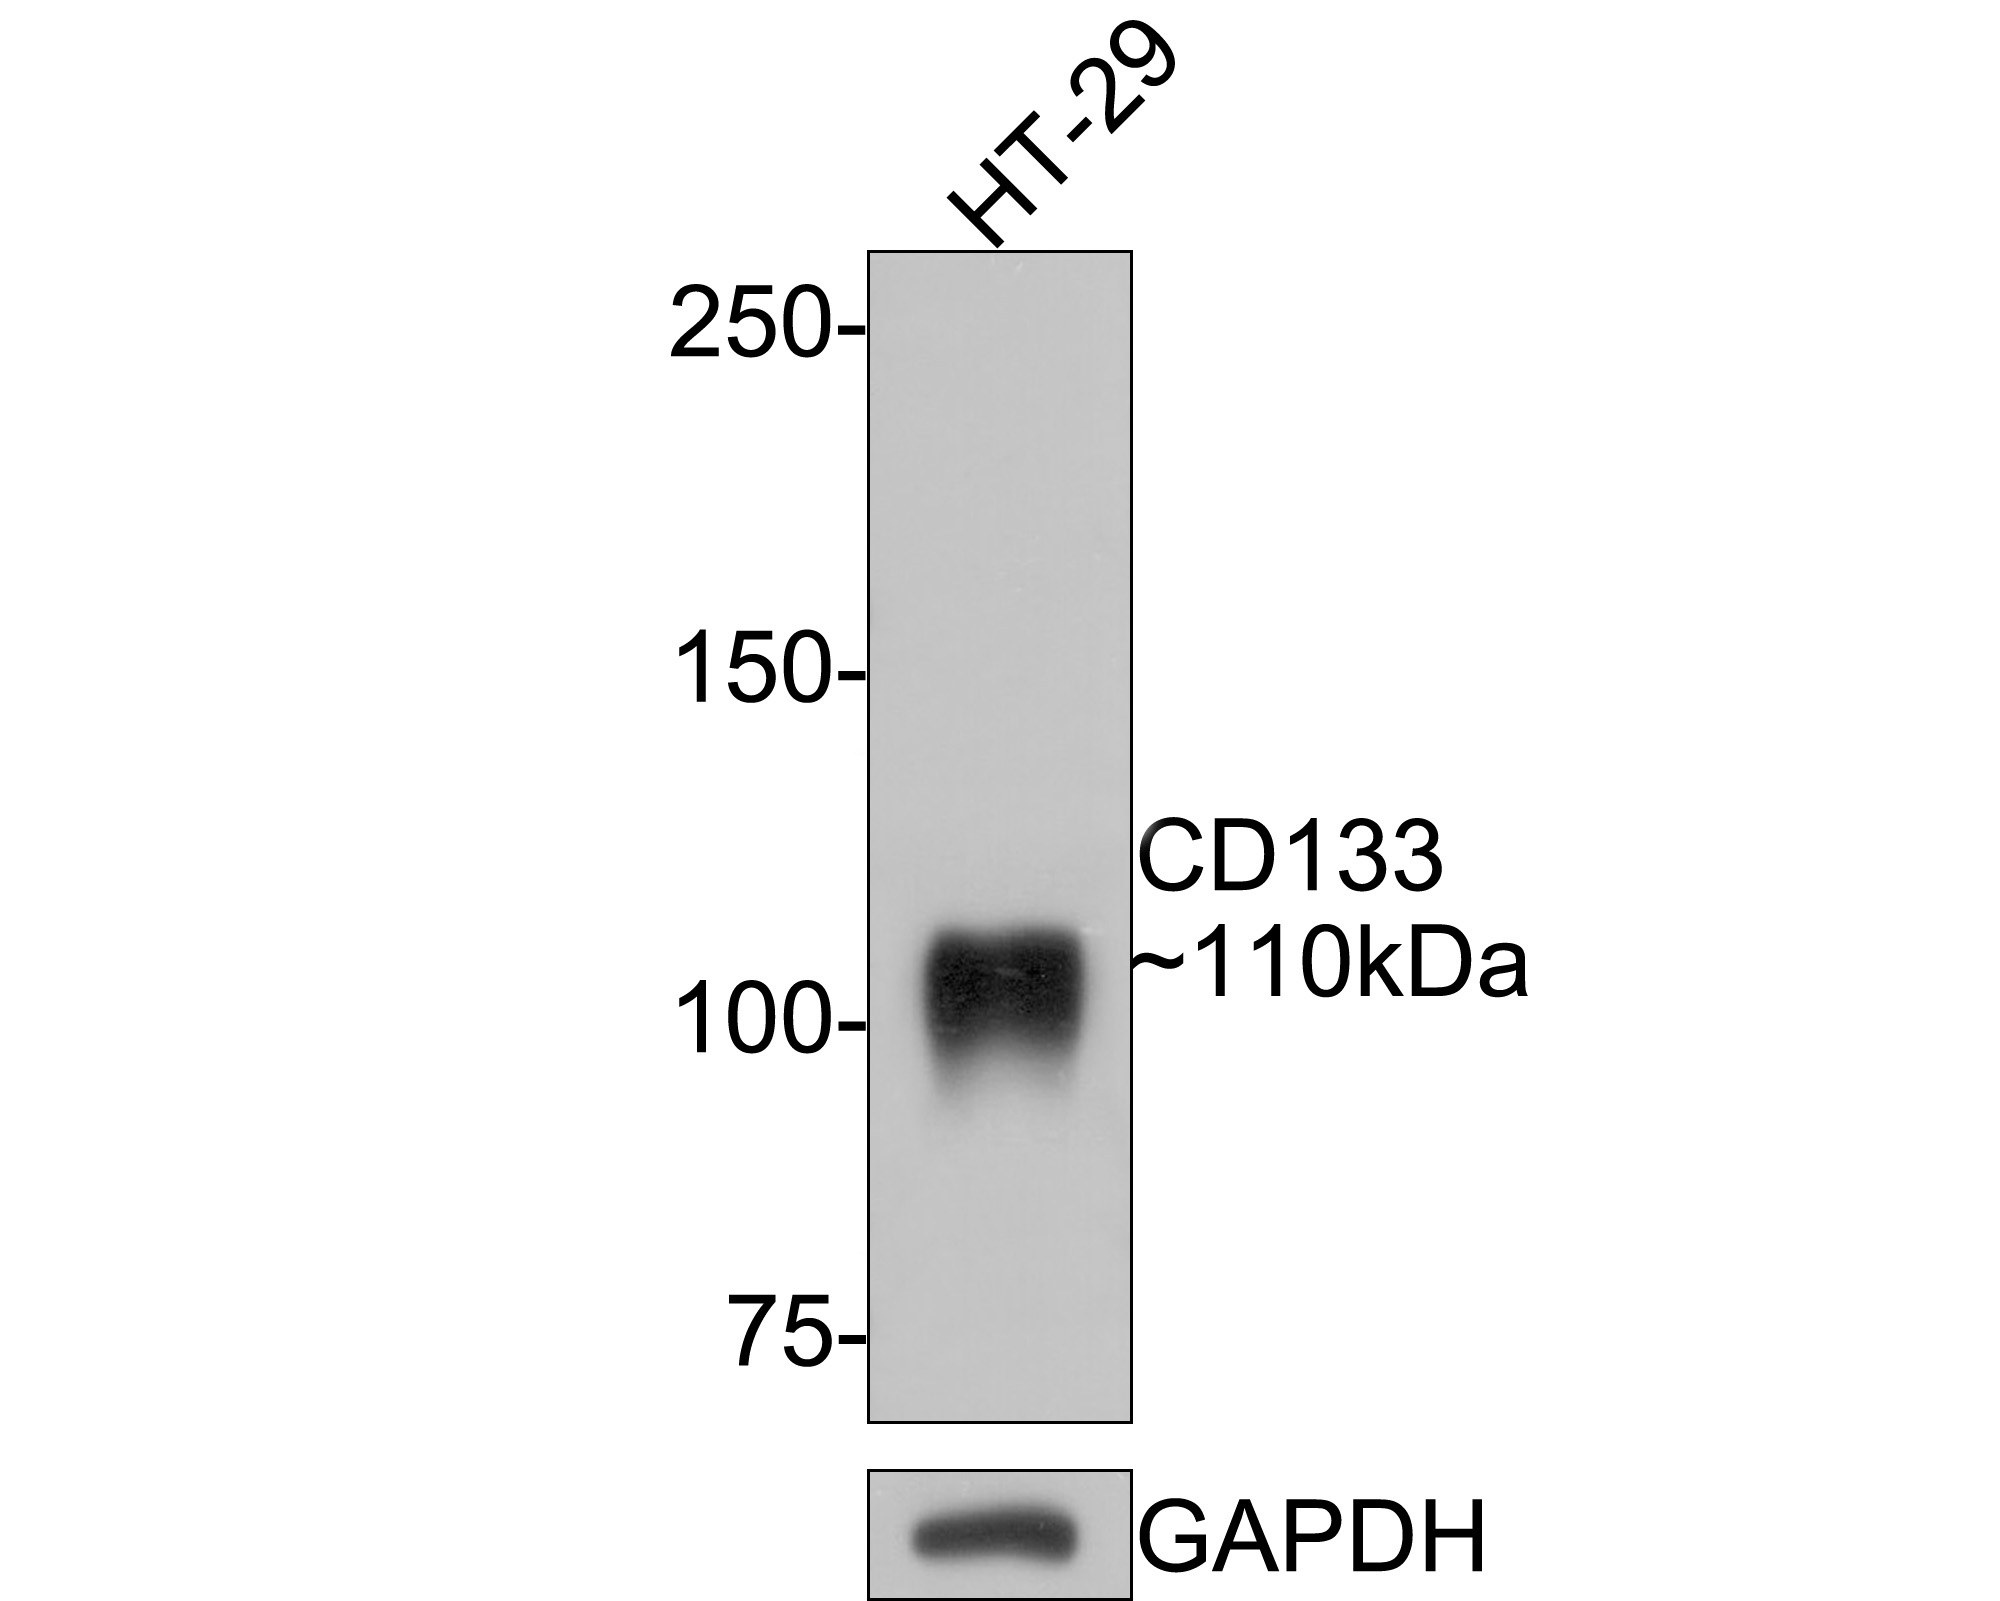 Western blot analysis of CD133 on HT-29 cell lysates with Mouse anti-CD133 antibody (HA601024) at 1/500 dilution.<br />
<br />
Lysates/proteins at 10 µg/Lane.<br />
<br />
Predicted band size: 97 kDa<br />
Observed band size: 110 kDa<br />
<br />
Exposure time: 1 minute;<br />
<br />
6% SDS-PAGE gel.<br />
<br />
Proteins were transferred to a PVDF membrane and blocked with 5% NFDM/TBST for 1 hour at room temperature. The primary antibody (HA601024) at 1/500 dilution was used in 5% NFDM/TBST at room temperature for 2 hours. Goat Anti-Mouse IgG - HRP Secondary Antibody (HA1006) at 1:100,000 dilution was used for 1 hour at room temperature.